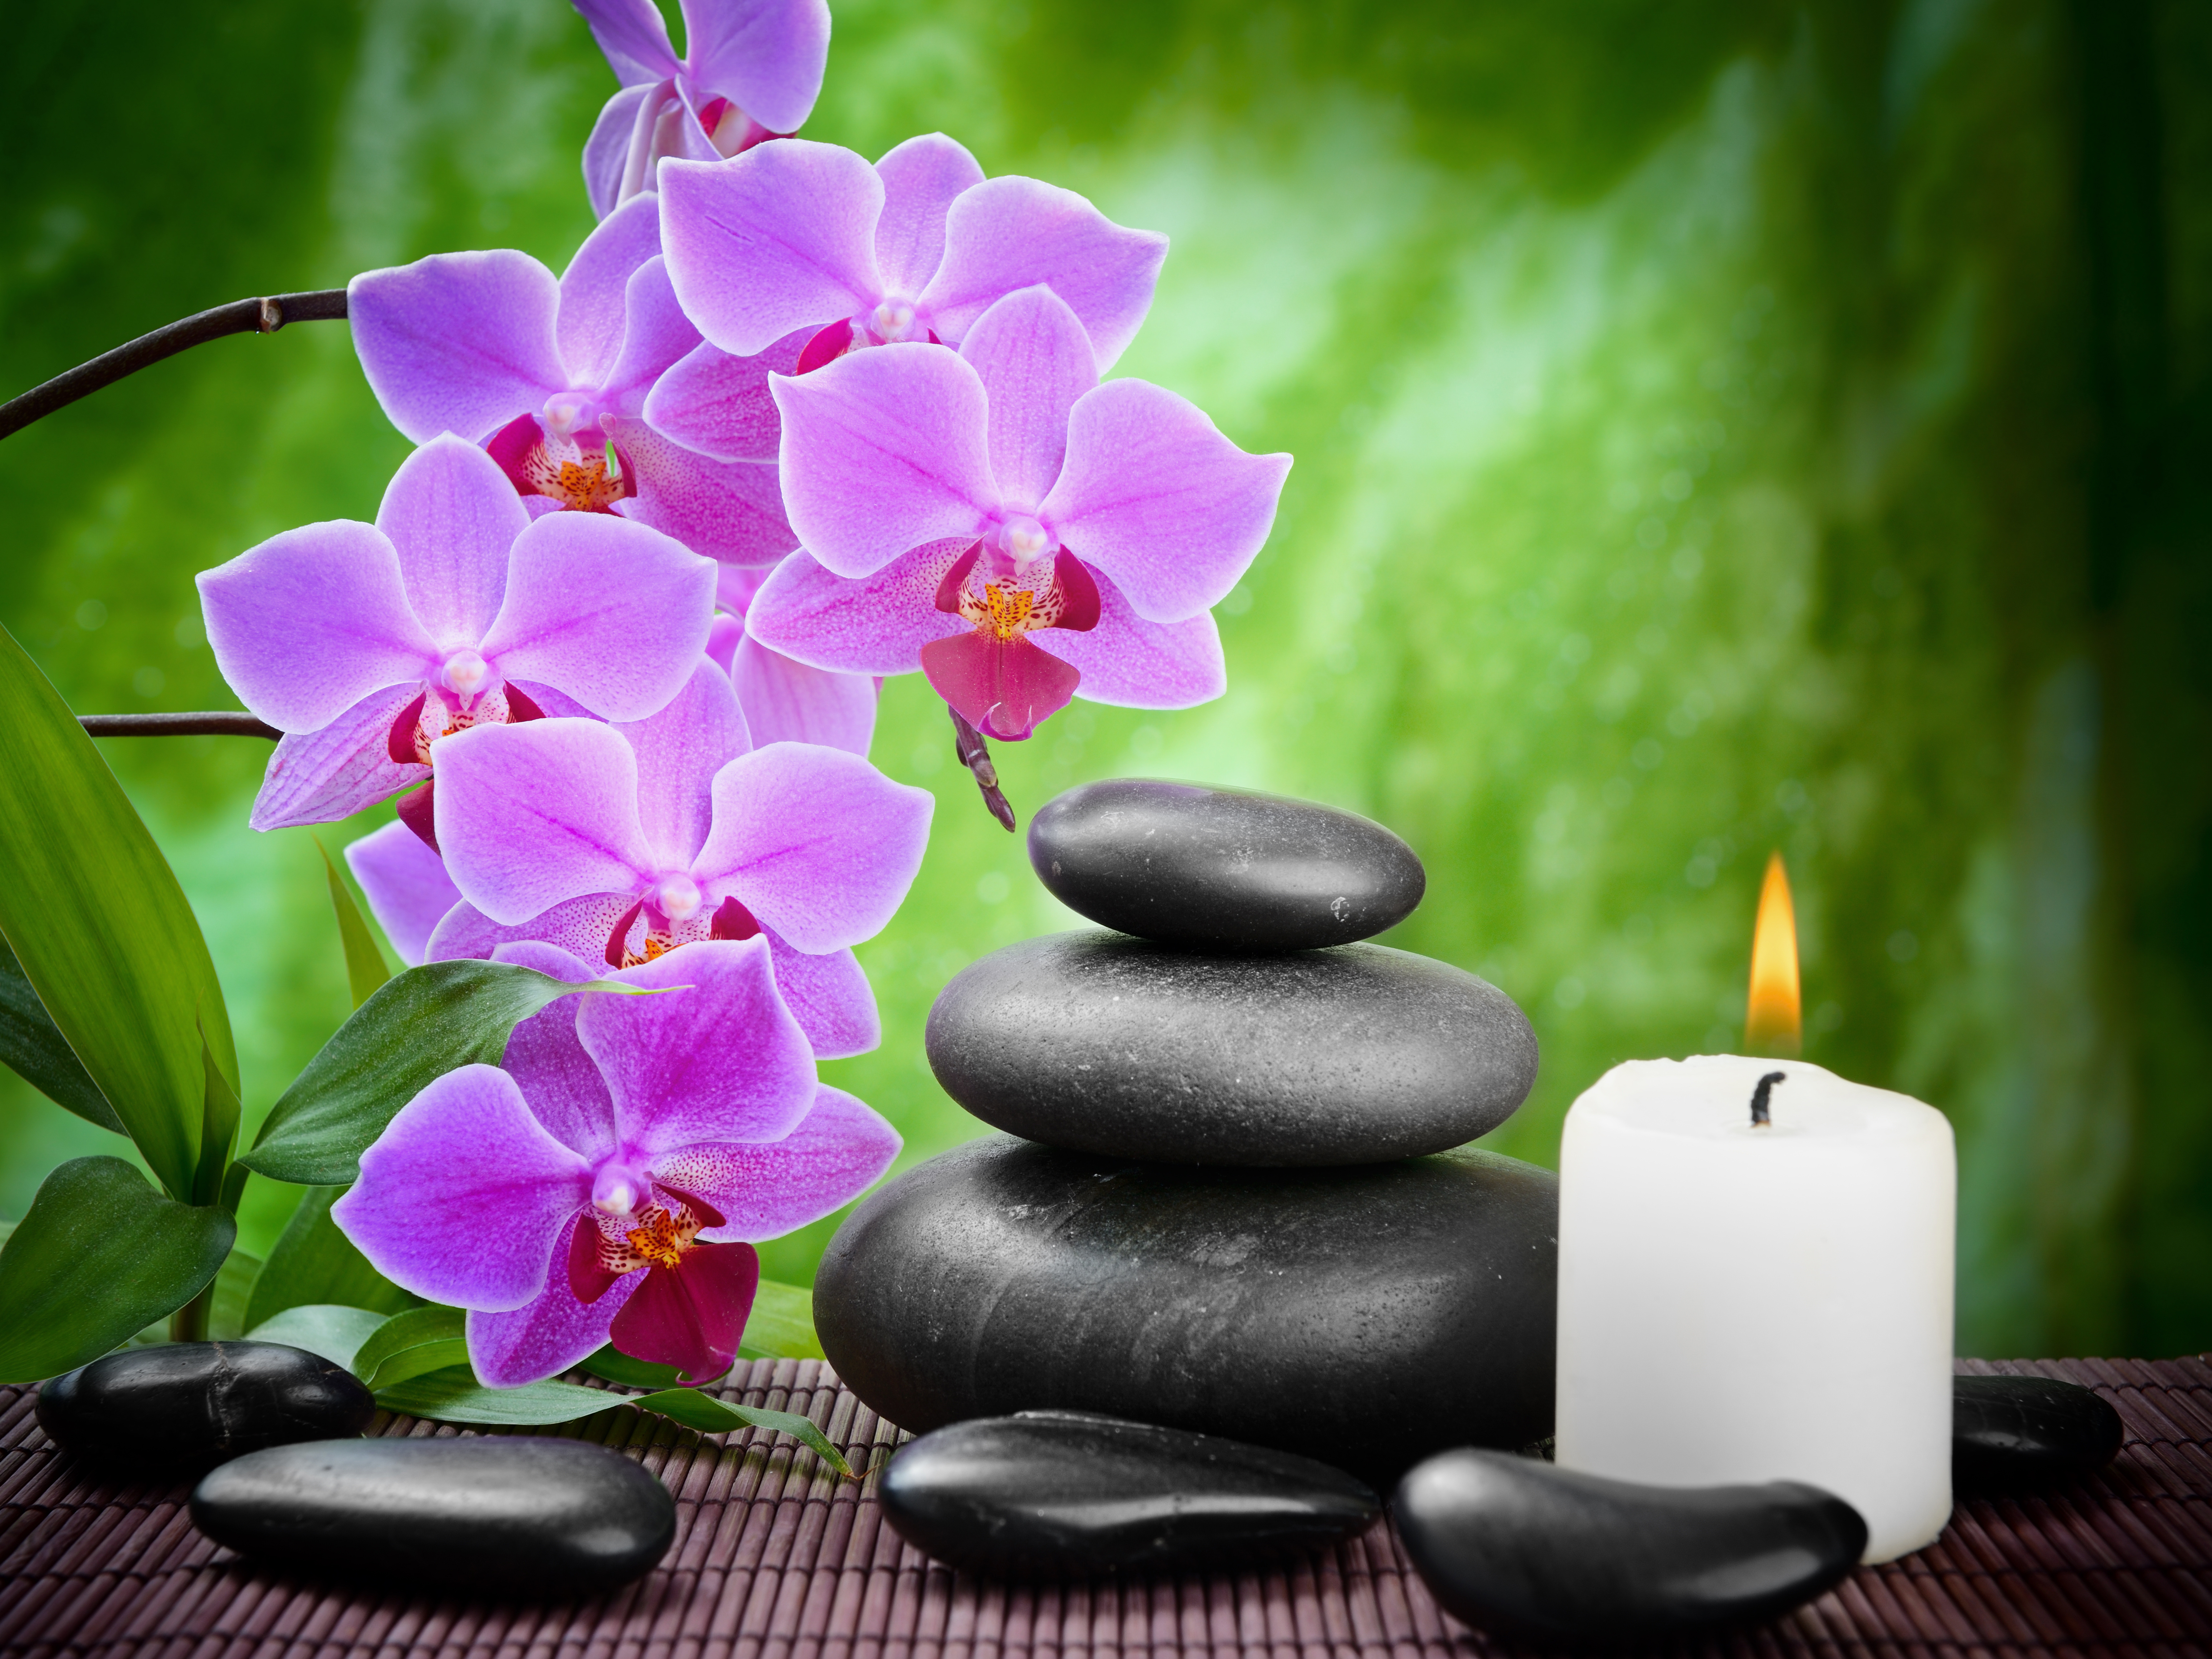 Green Spa Background with Orchidsm1399676400